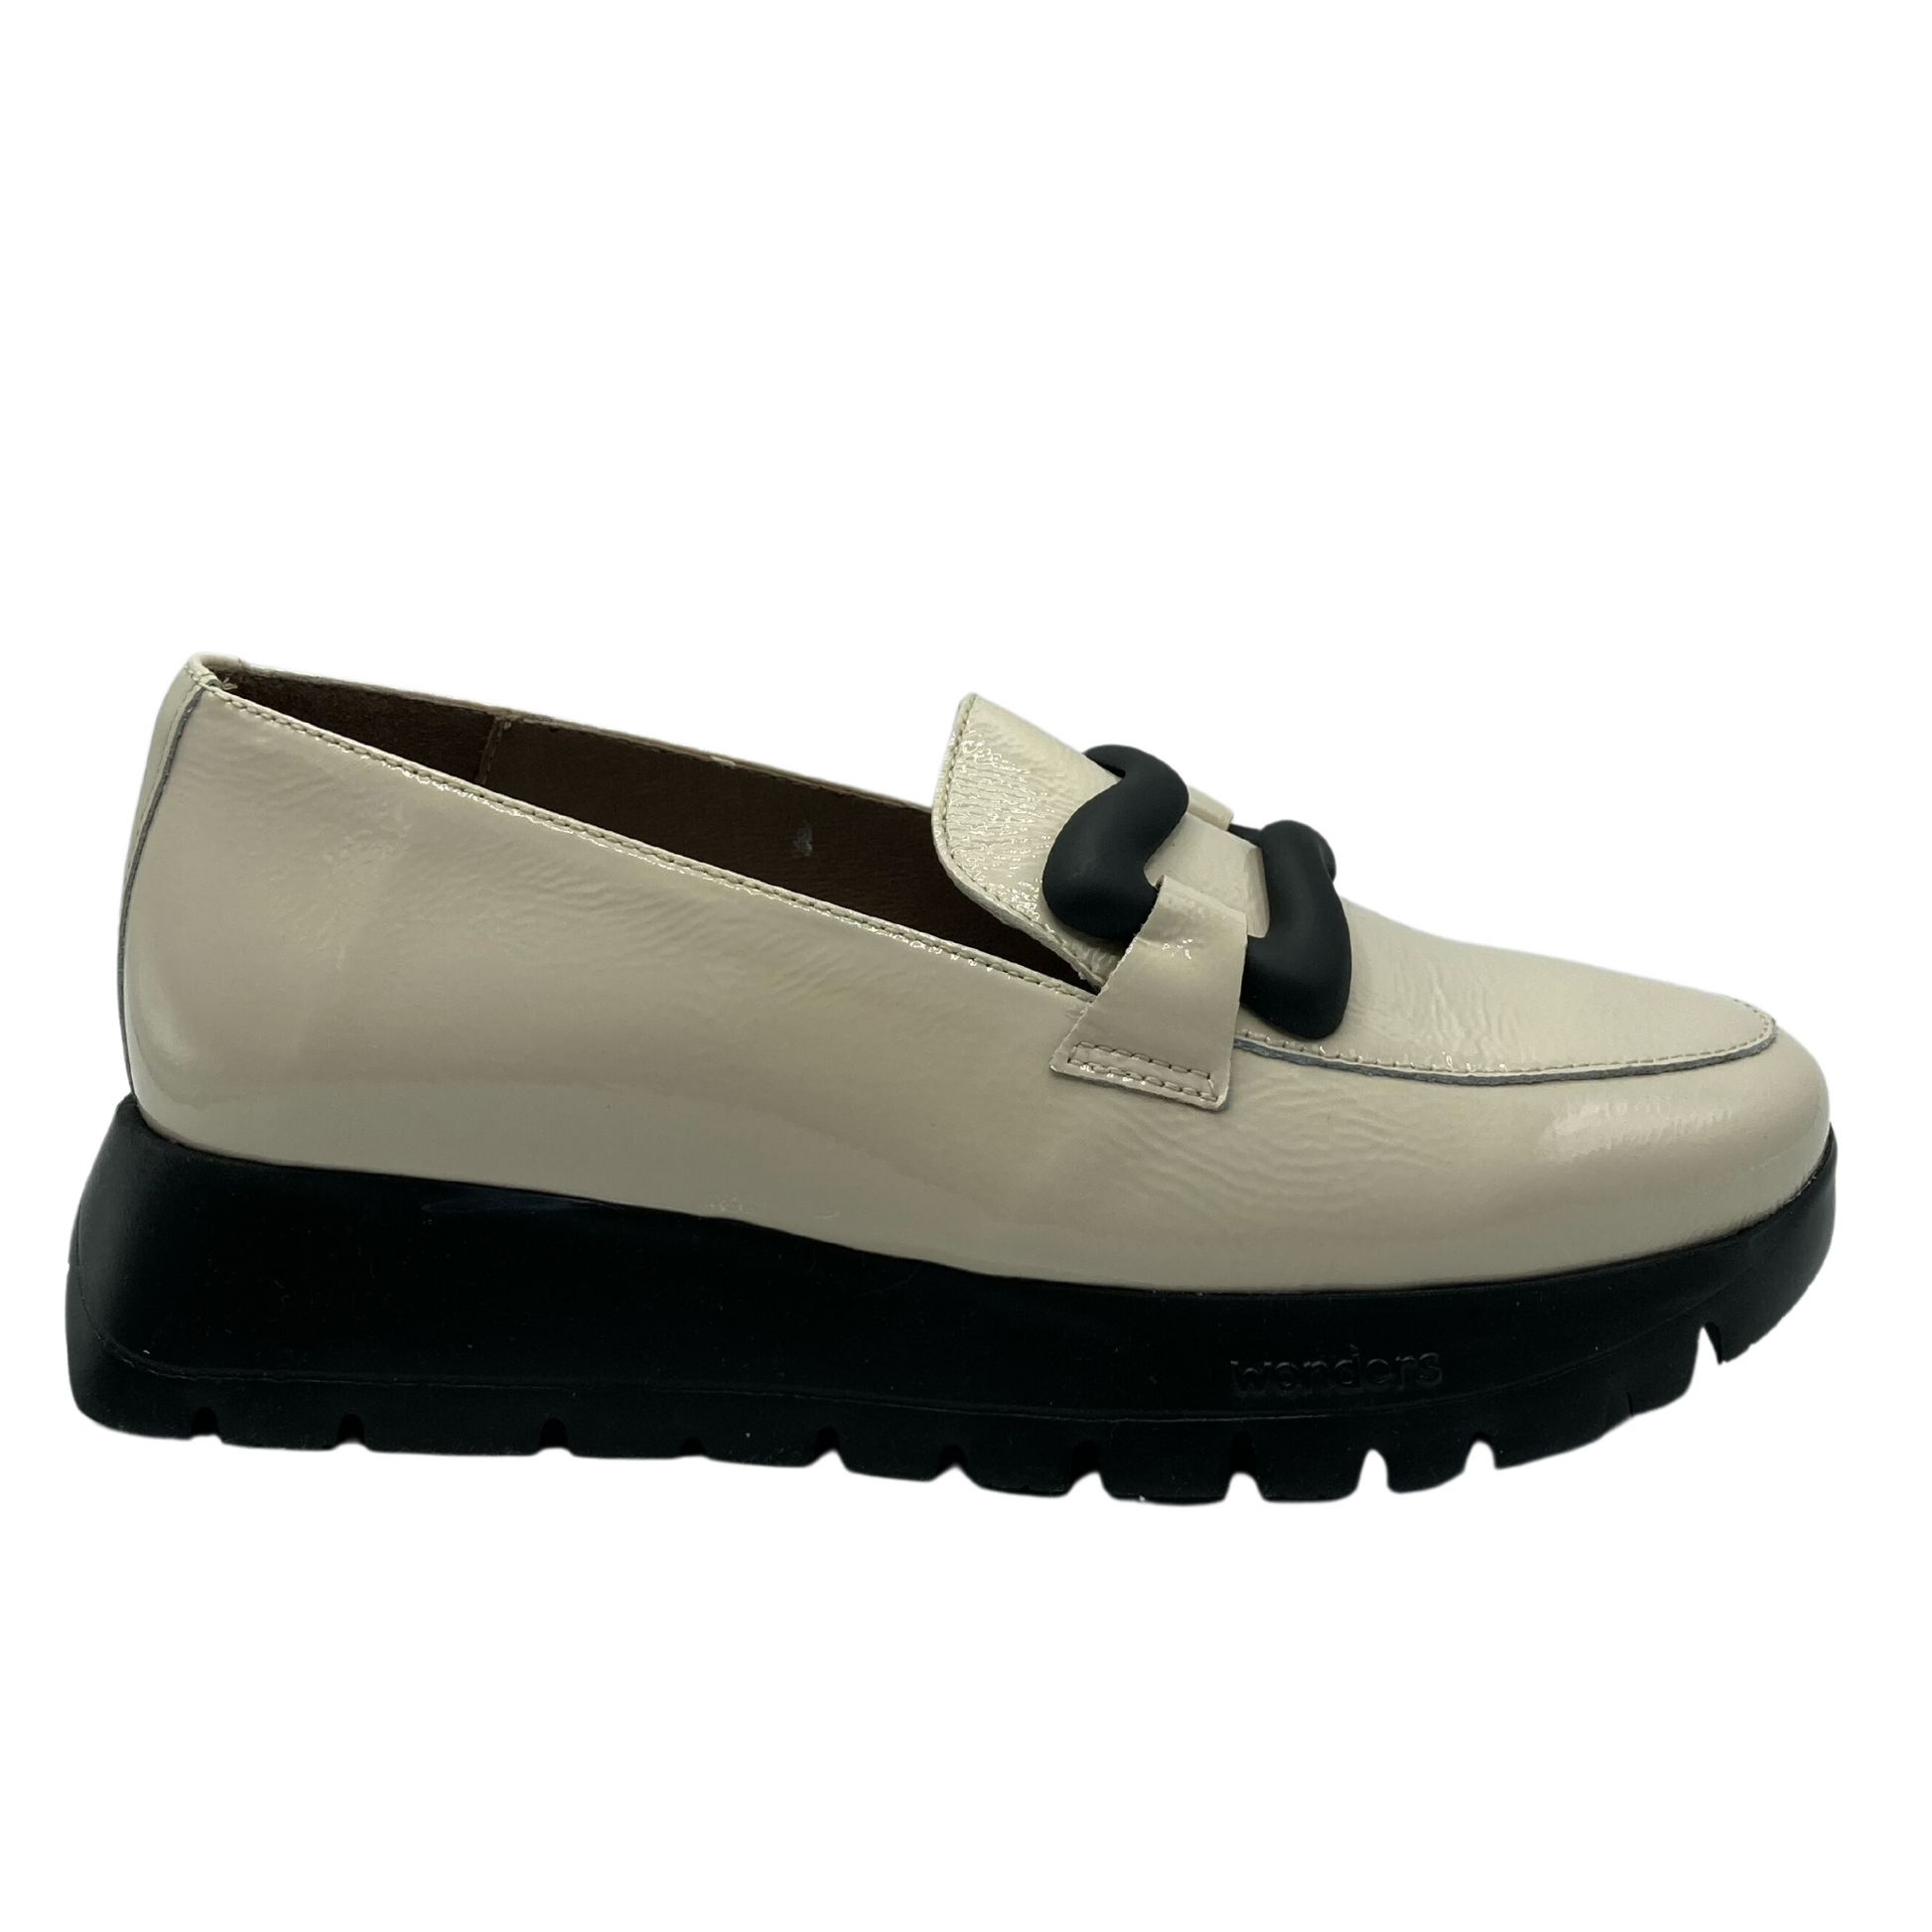 View of the platform loafer from the side. Cream colour upper with black sole